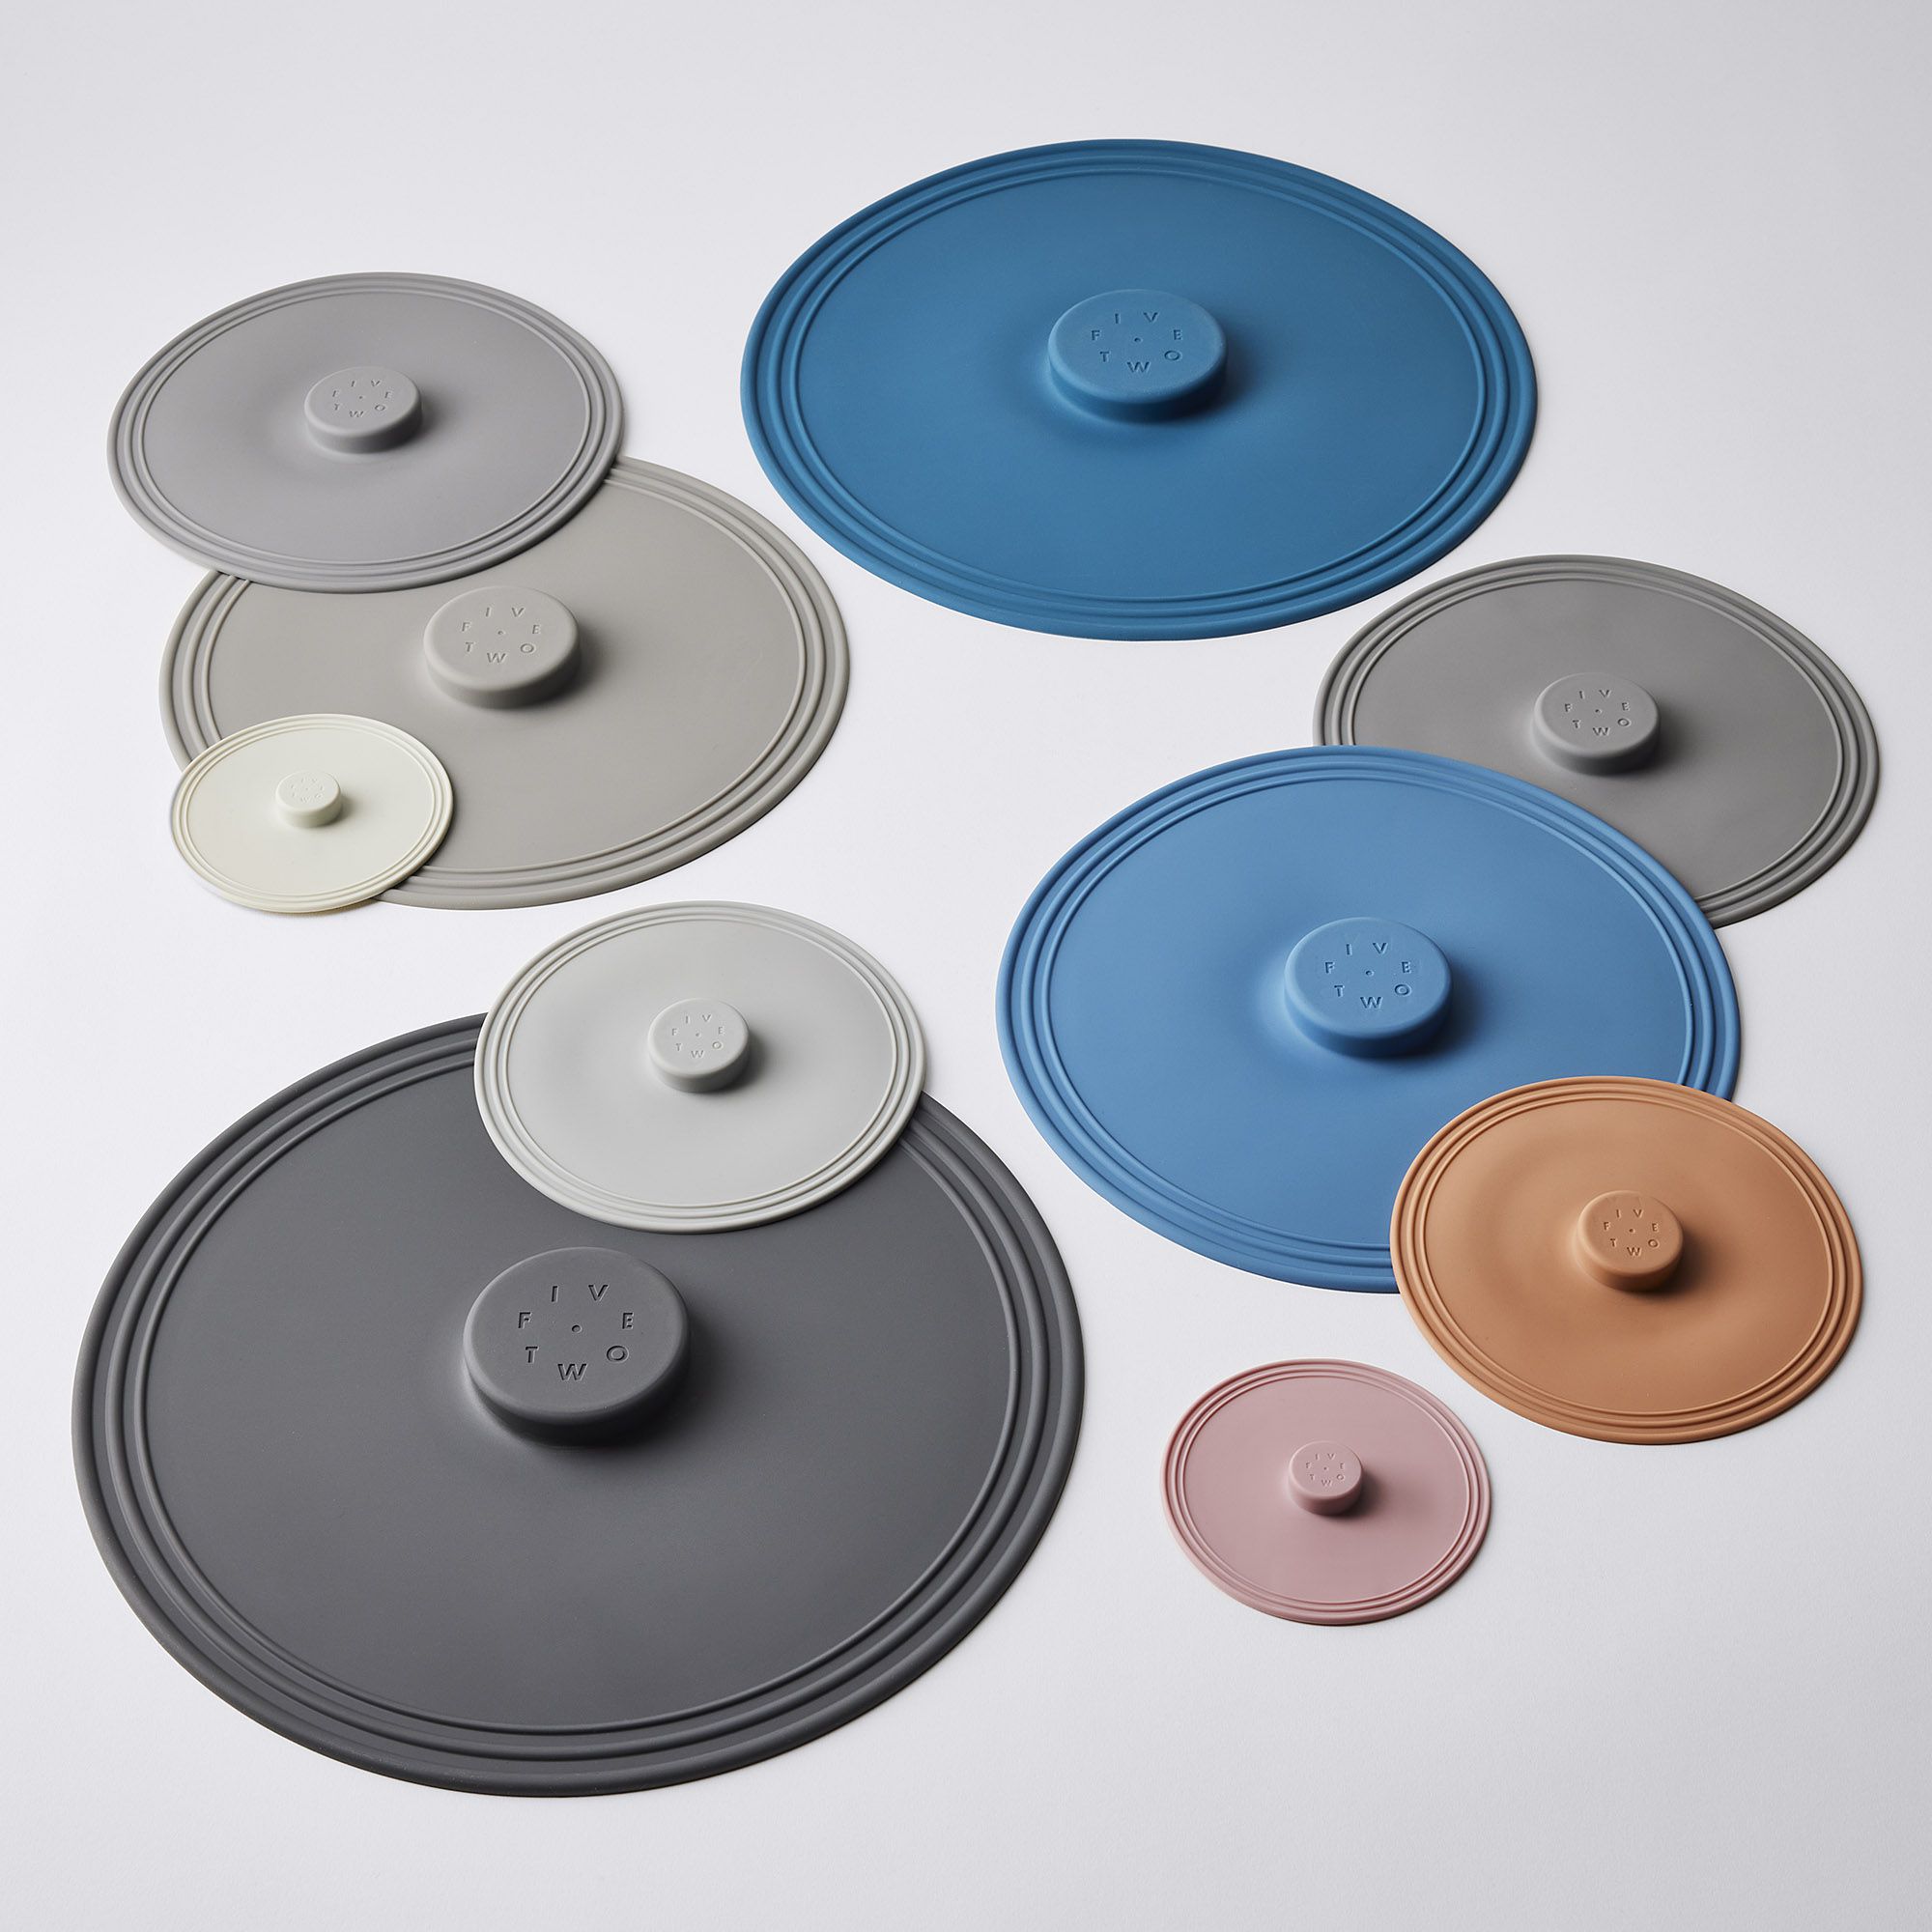 57cfe3eb 7aea 4900 bff9 0d56bc6b43c7 2022 0506 five two silicone lids collection silo mj kroeger